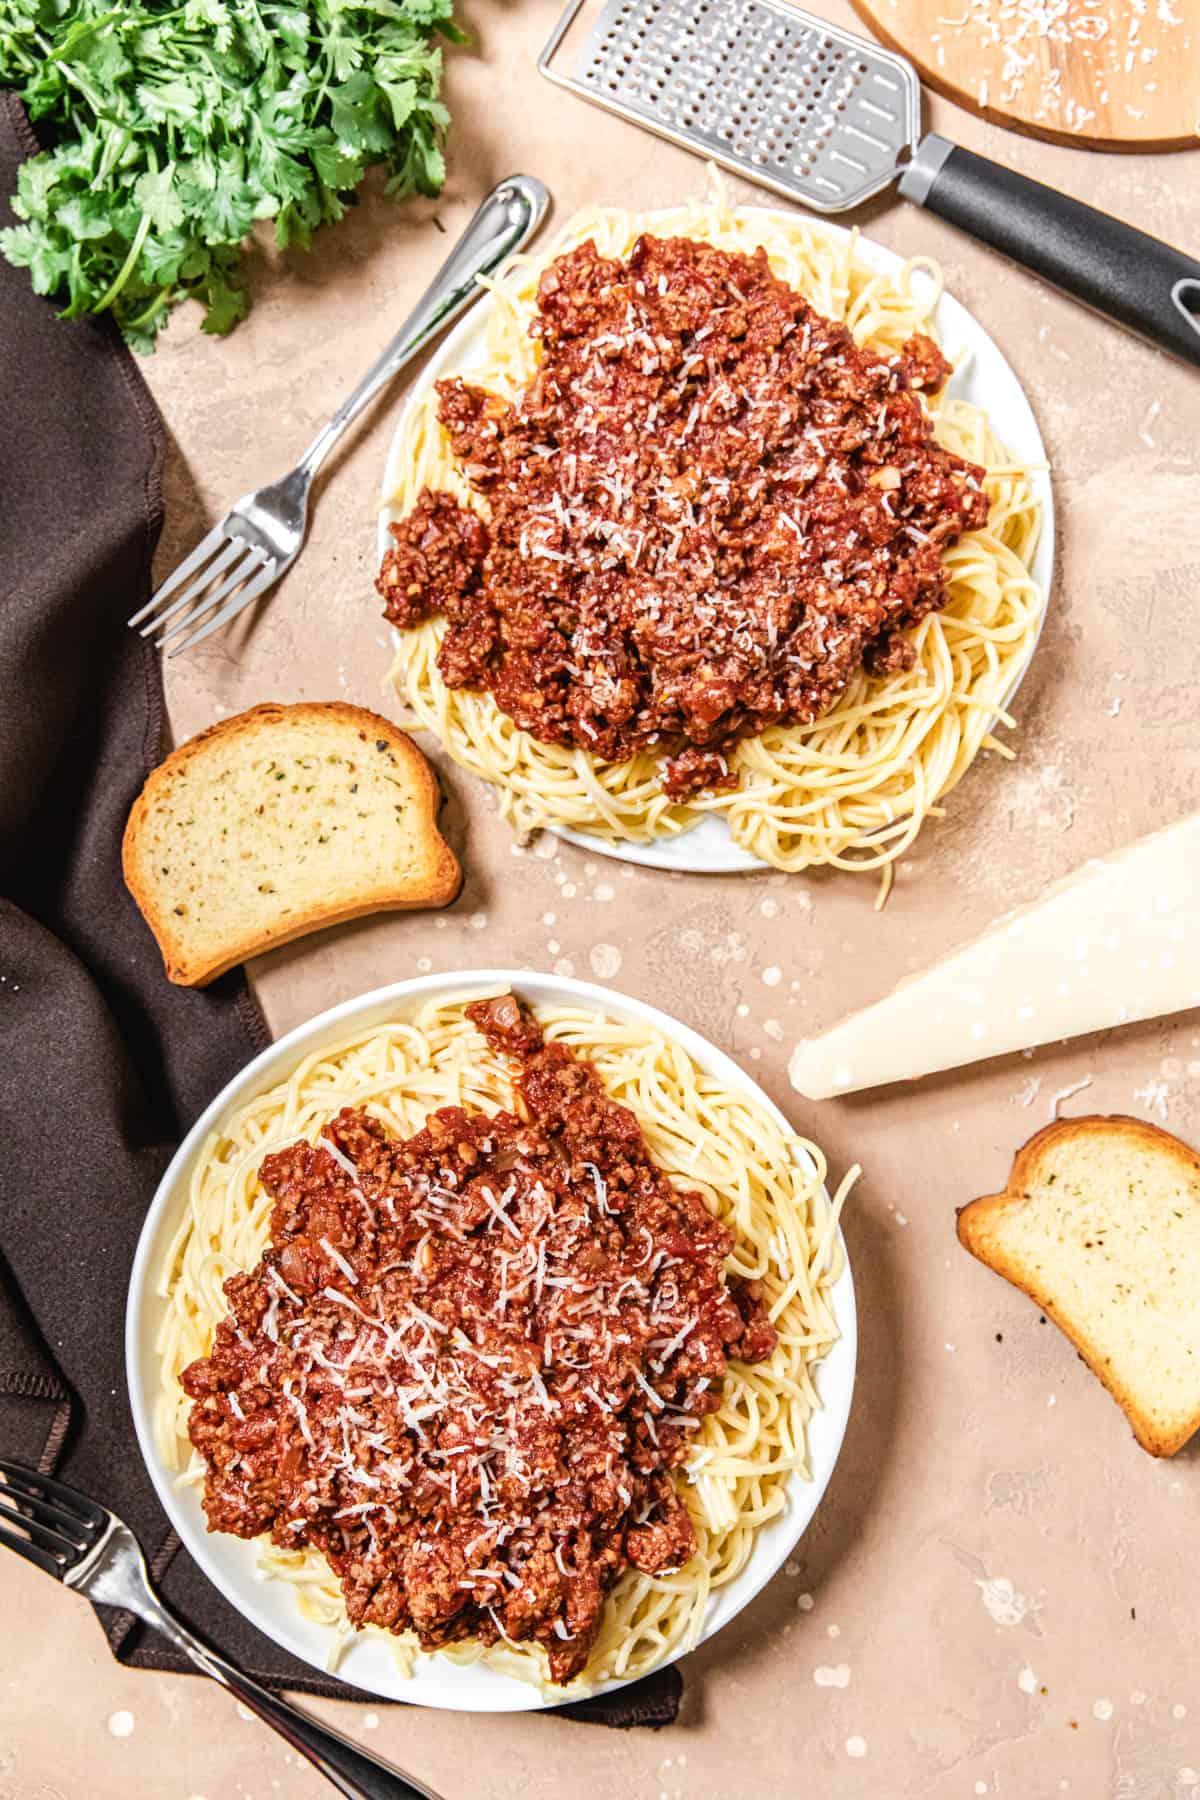 two plates of spaghetti and meat sauce with garlic bread, parmesan and cilantro around them